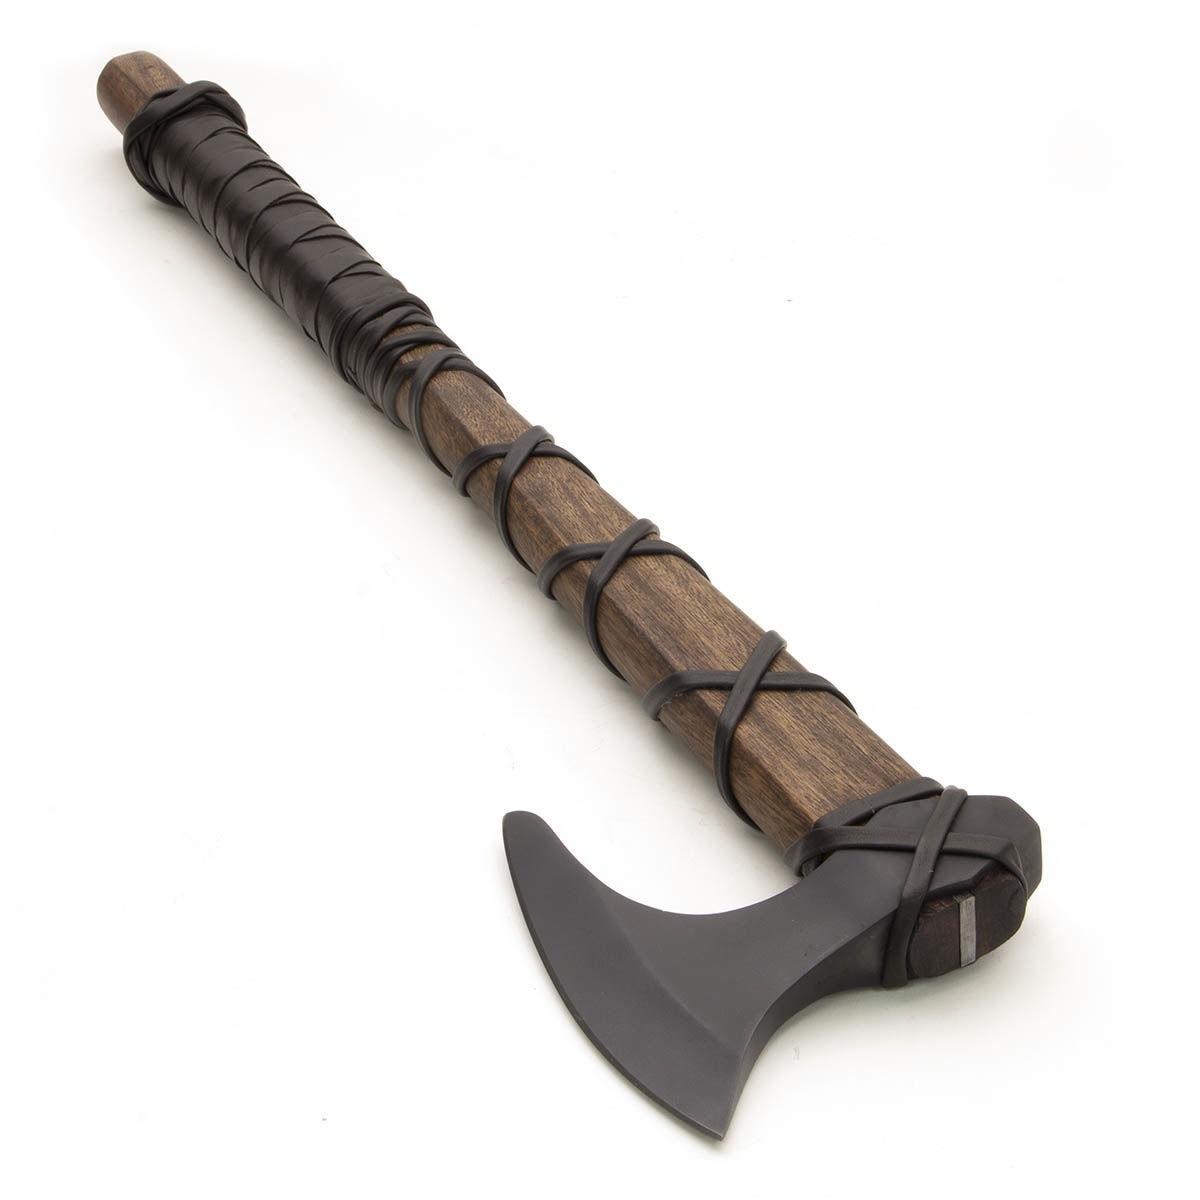 Ragnar's Axe with Leather Hanger